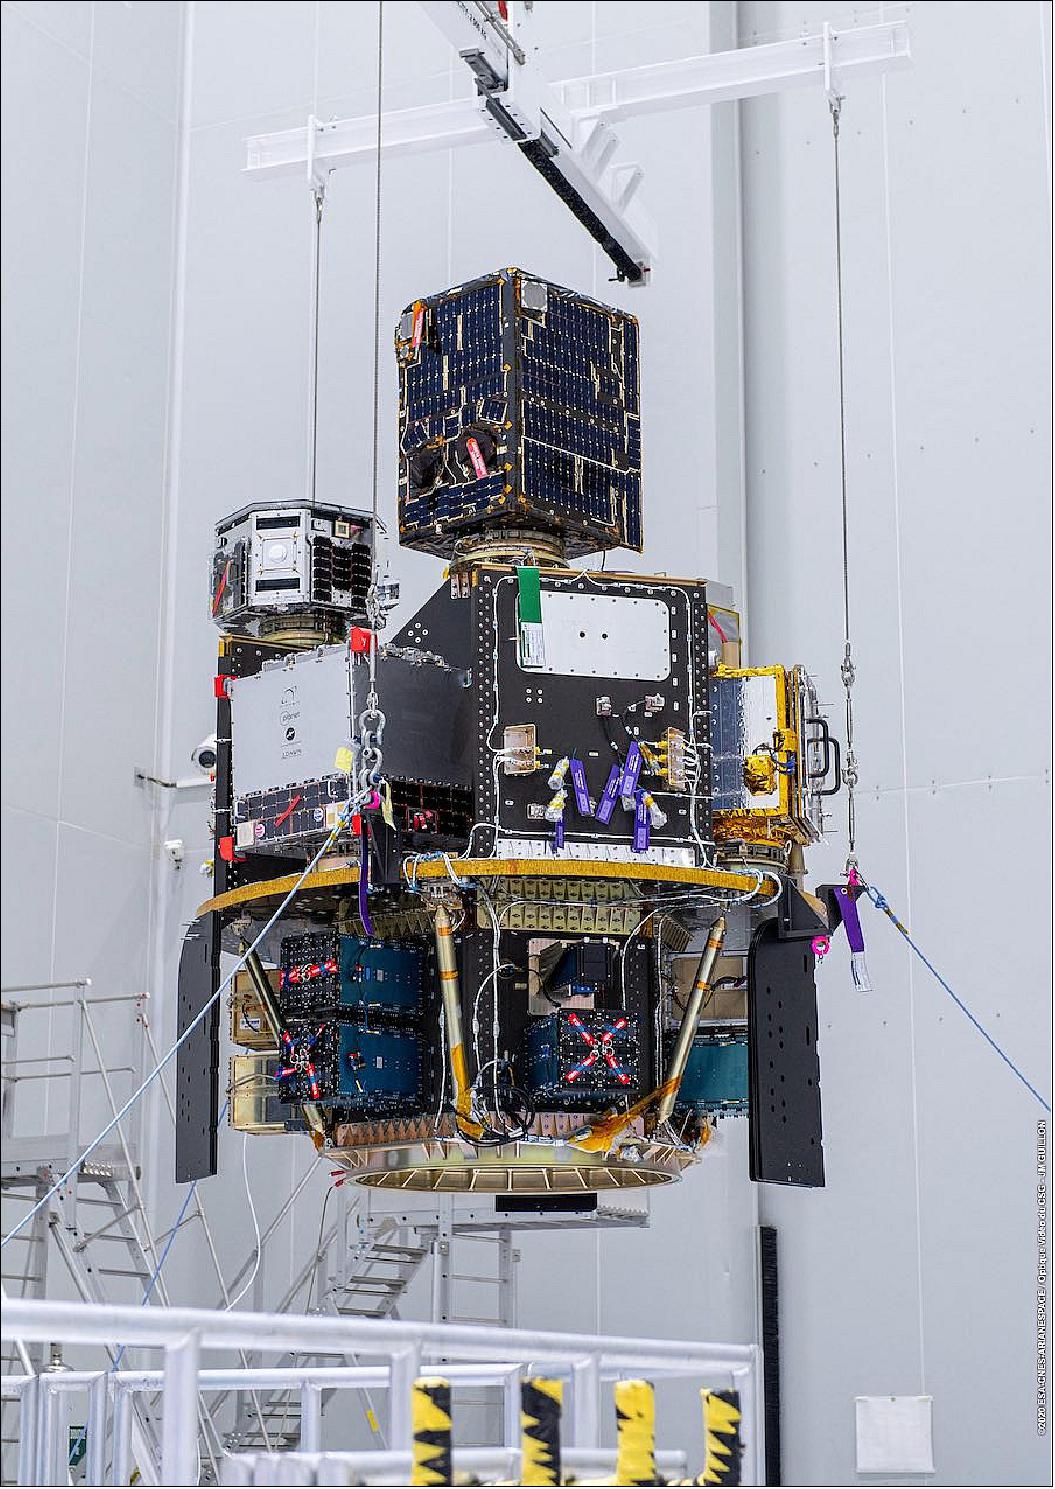 Figure 8: Technicians at the Guiana Space Center lift a stack of 53 small spacecraft for attachment to the Vga rocket’s payload adapter (image credit: ESA/CNES/Arianespace – Photo Optique Video du CSG – JM Guillon)